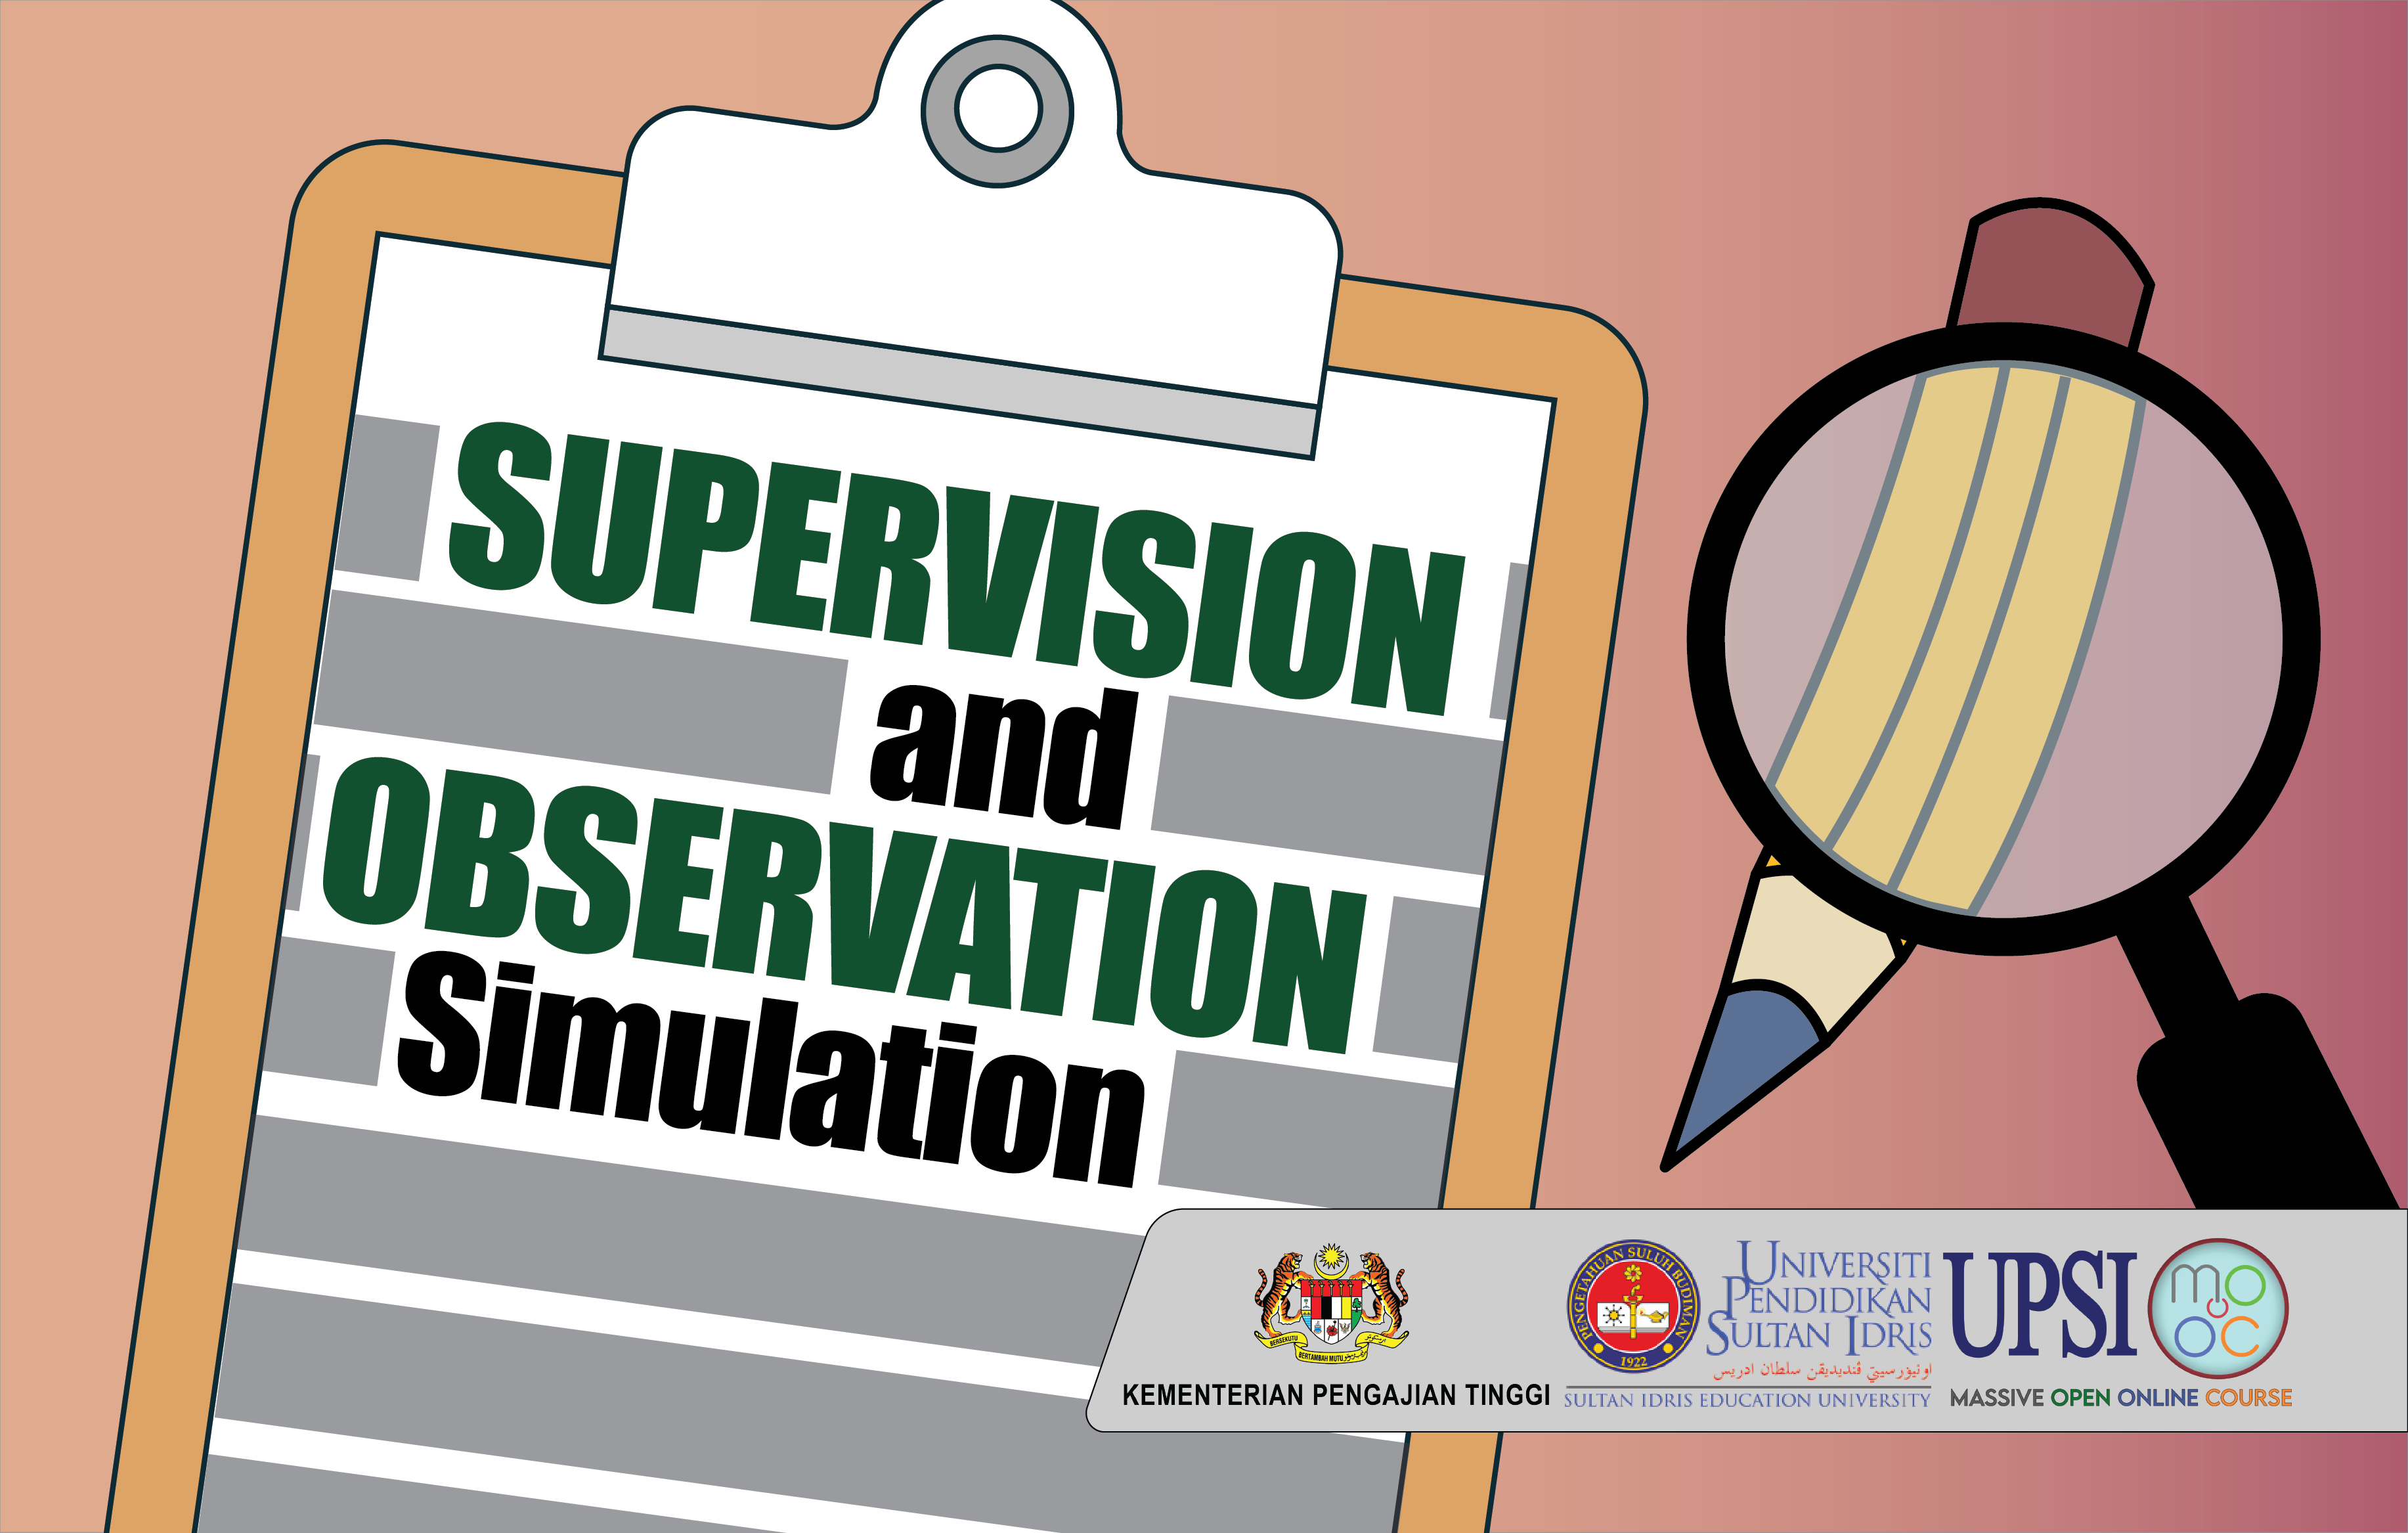 Supervision and Observation Simulation